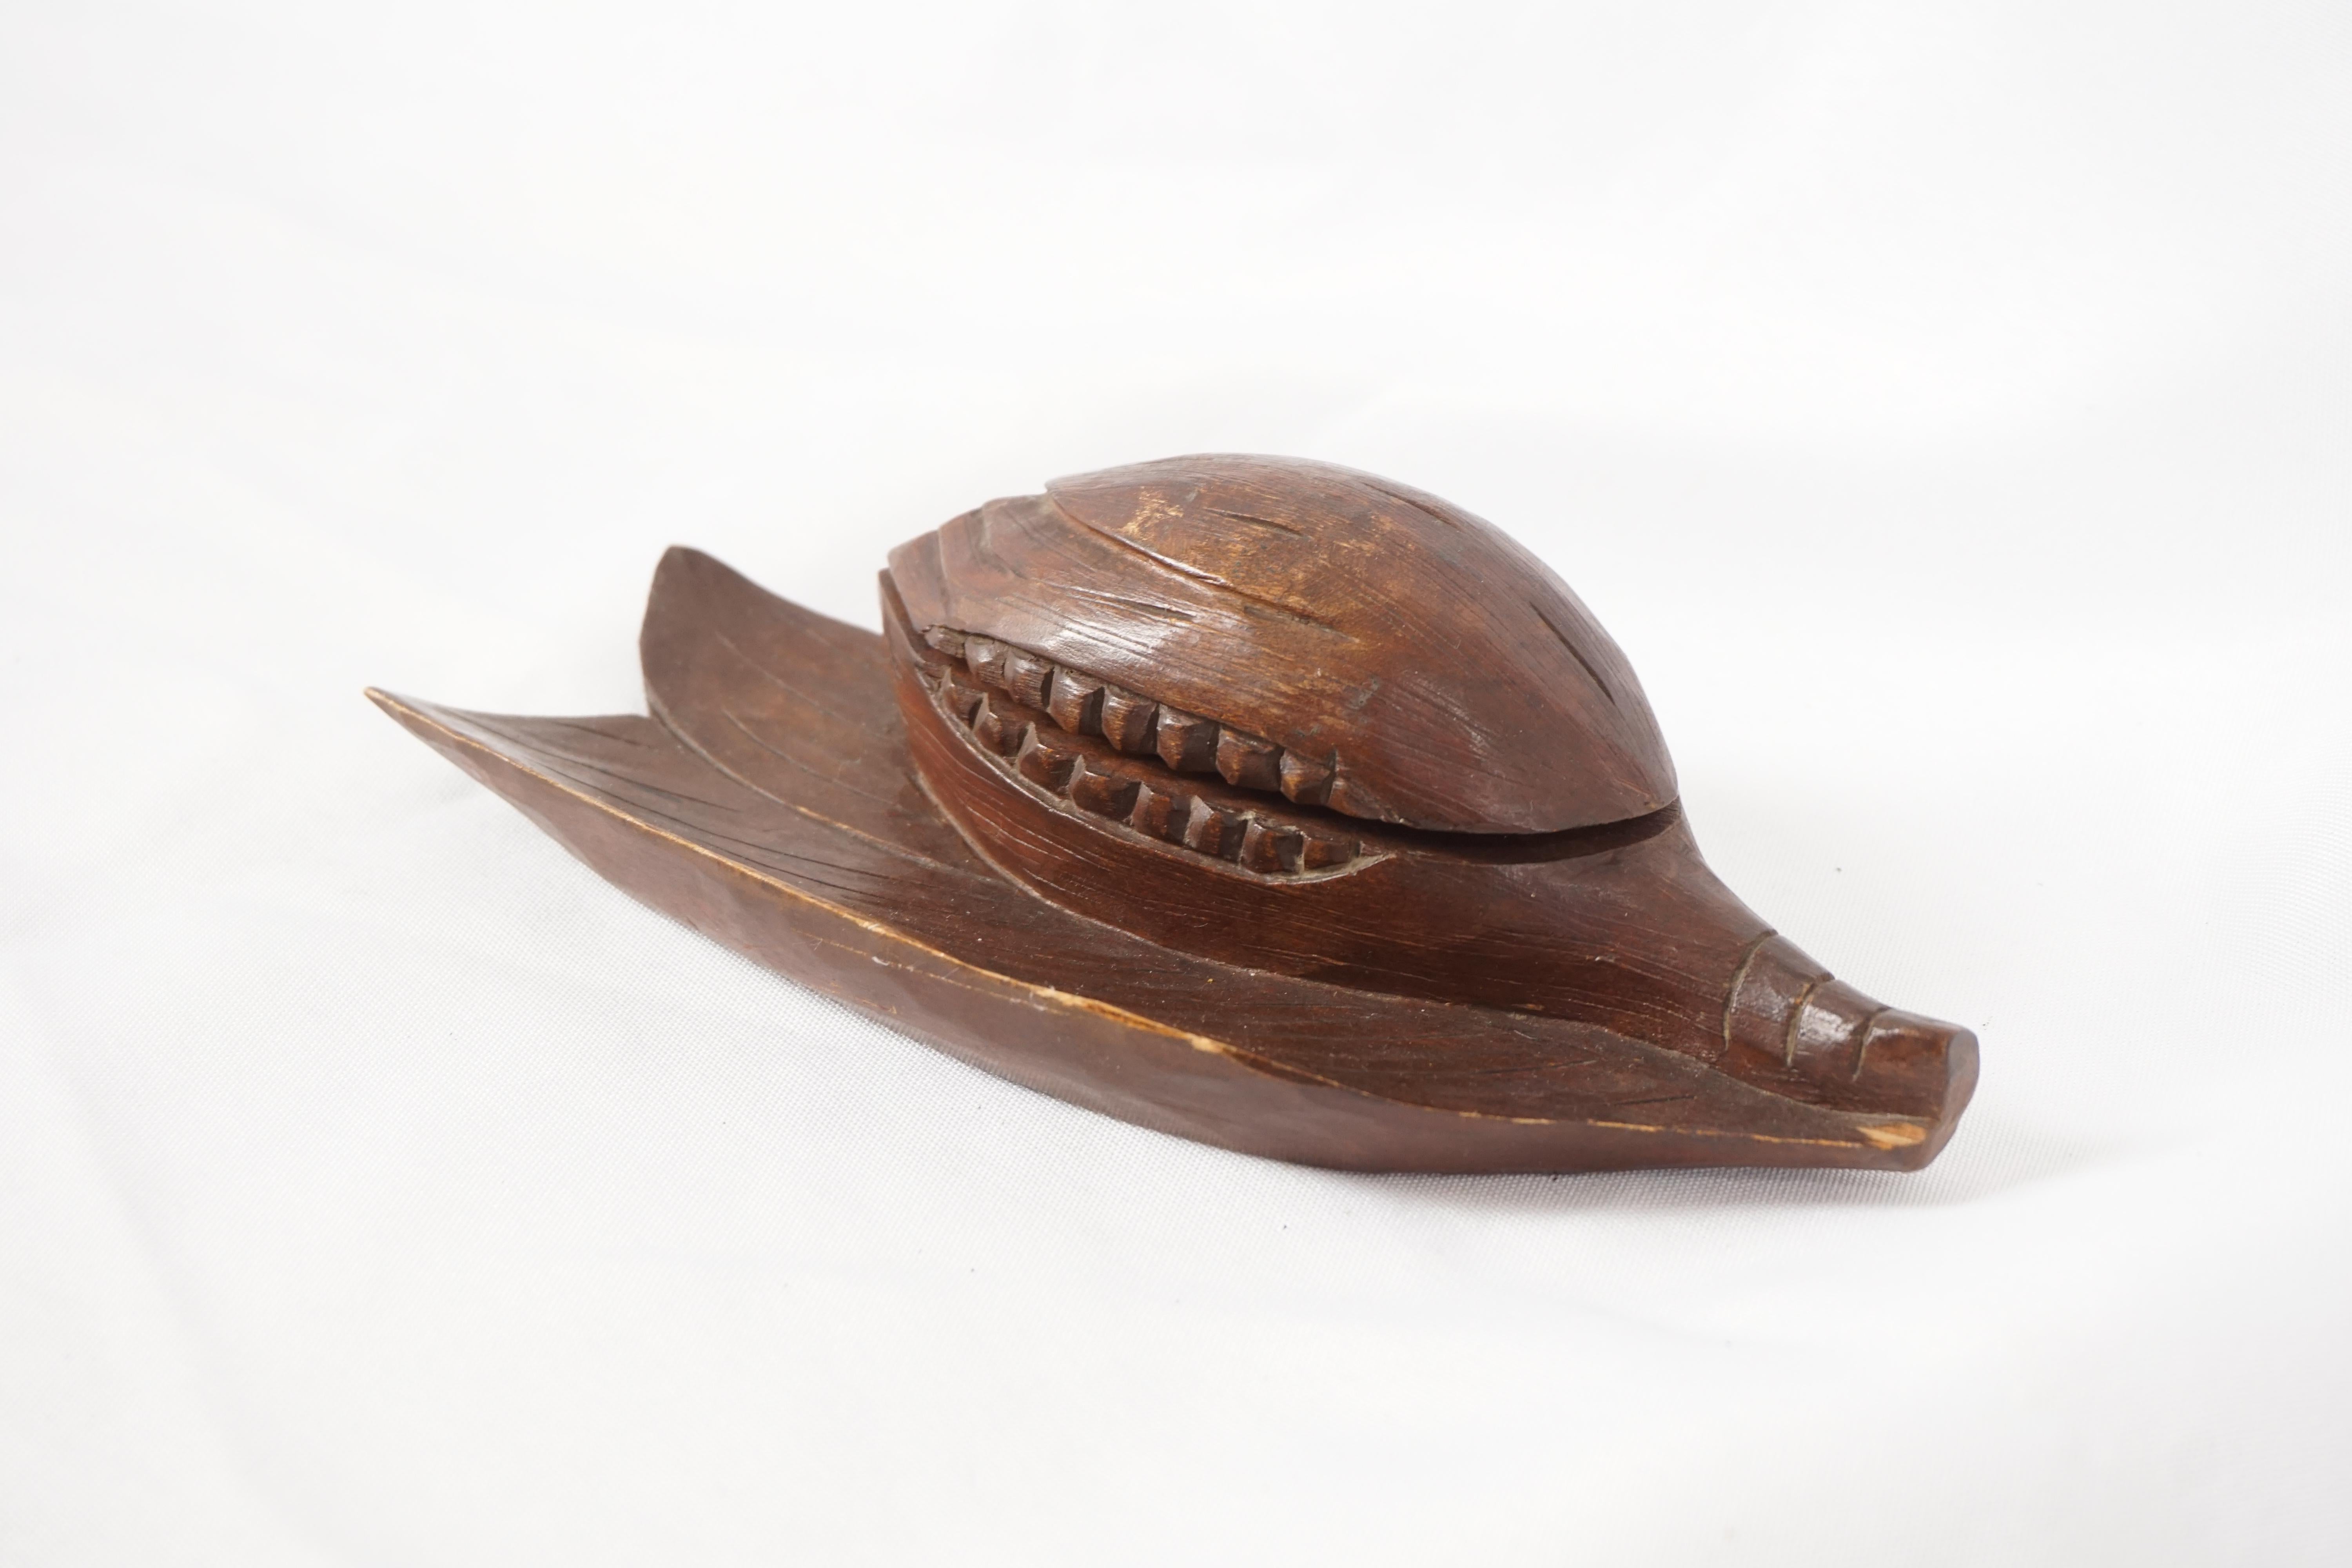 Vintage carved wooden inkwell, shape of a corn hush, European 1930, H307

European 1930
Wood
A carved wooden corn hush with lid top
Opens to reveal a single glass inkwell

H307

Measures: 6.75